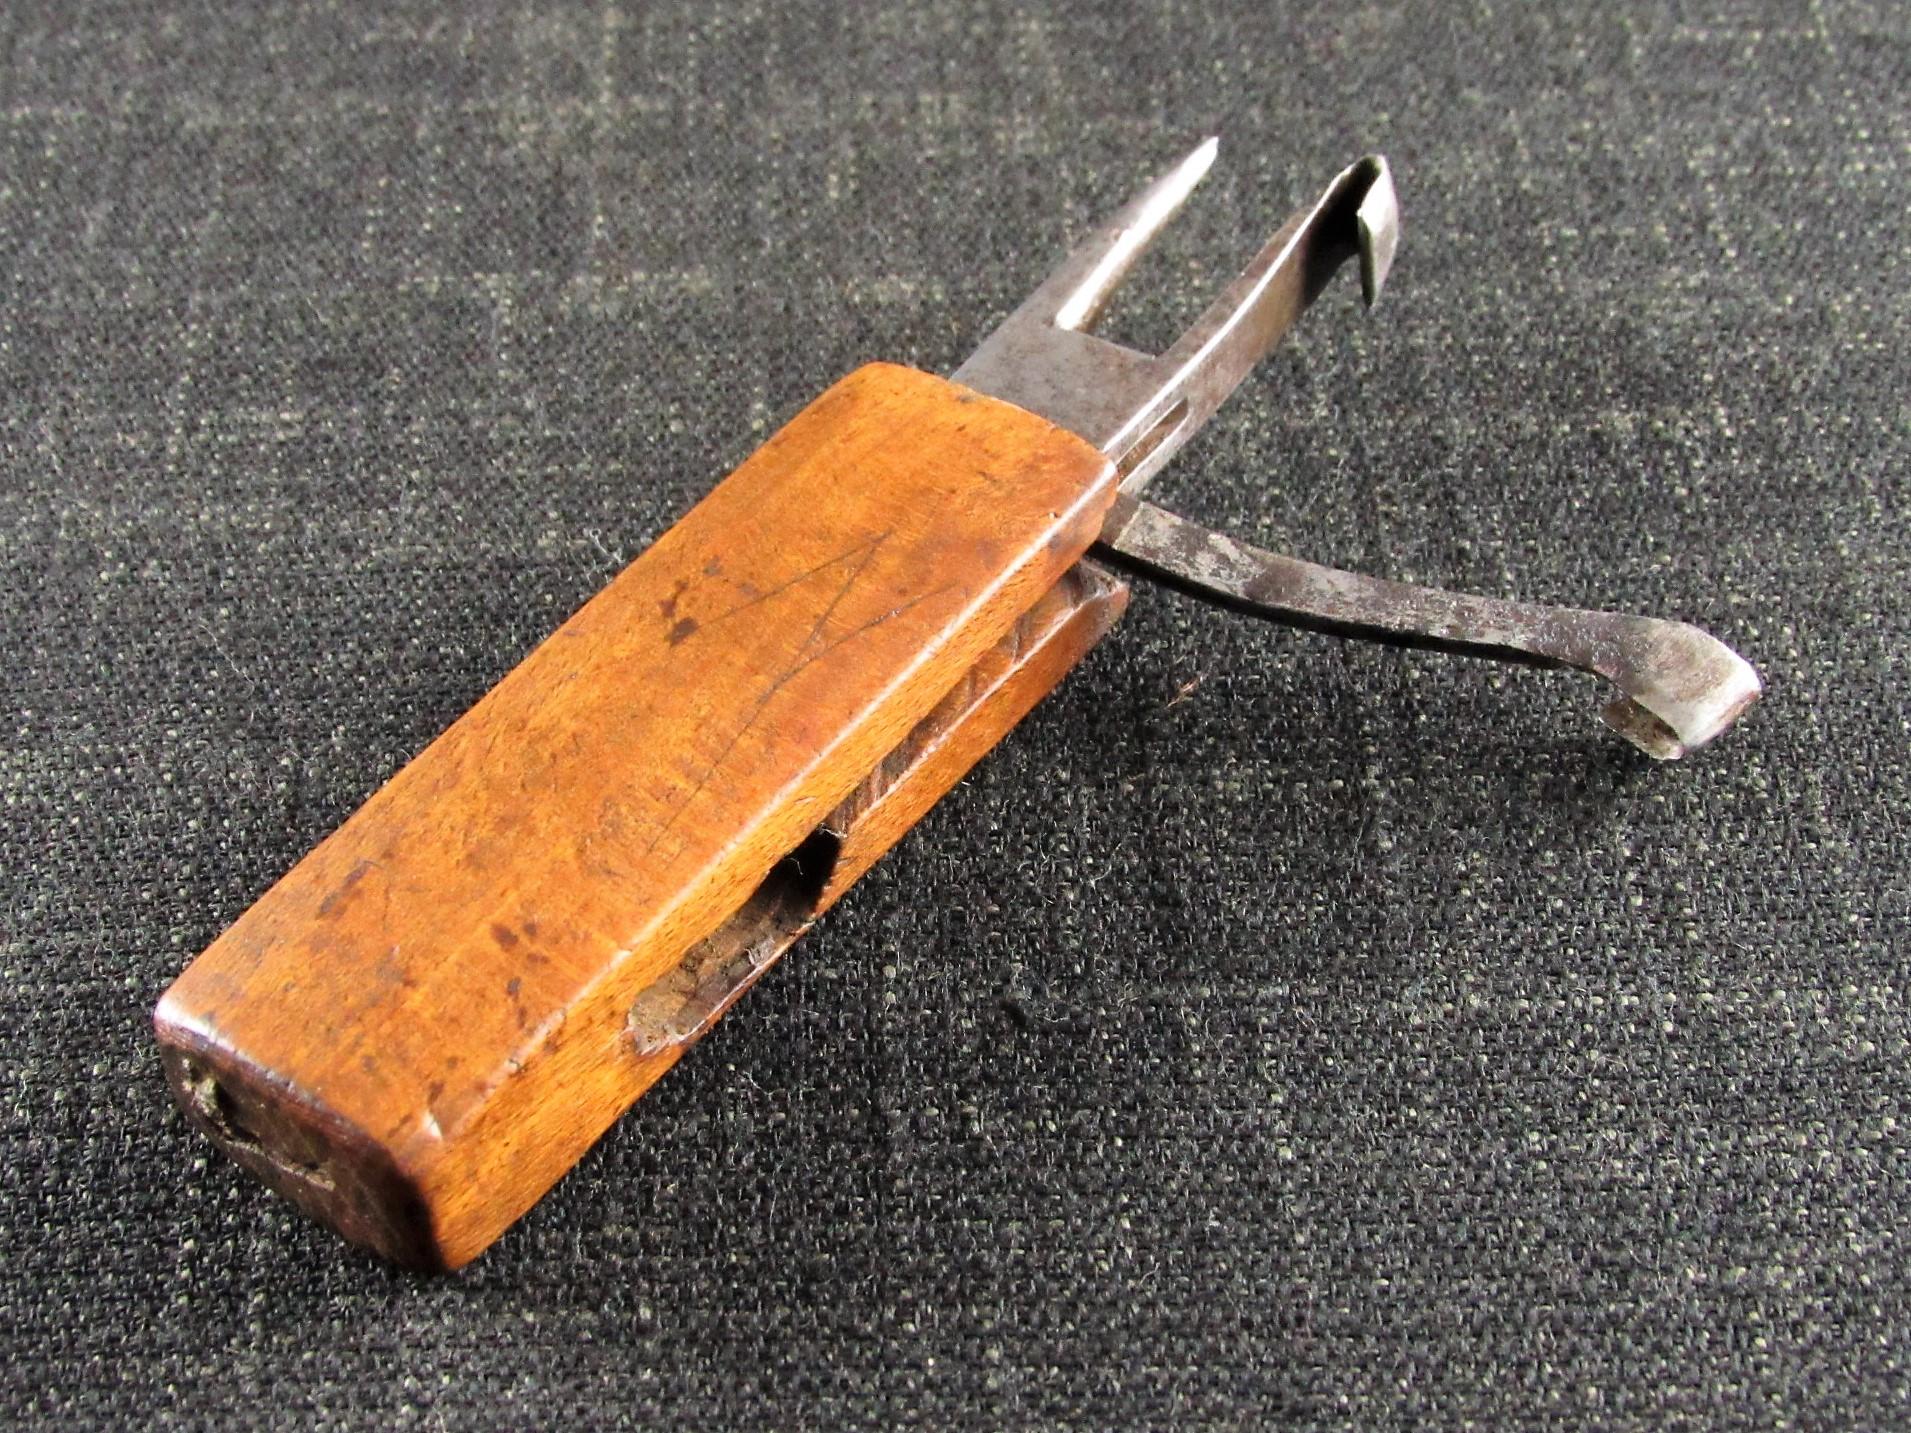 Wooden Handled Timber Scribe or Race Knife